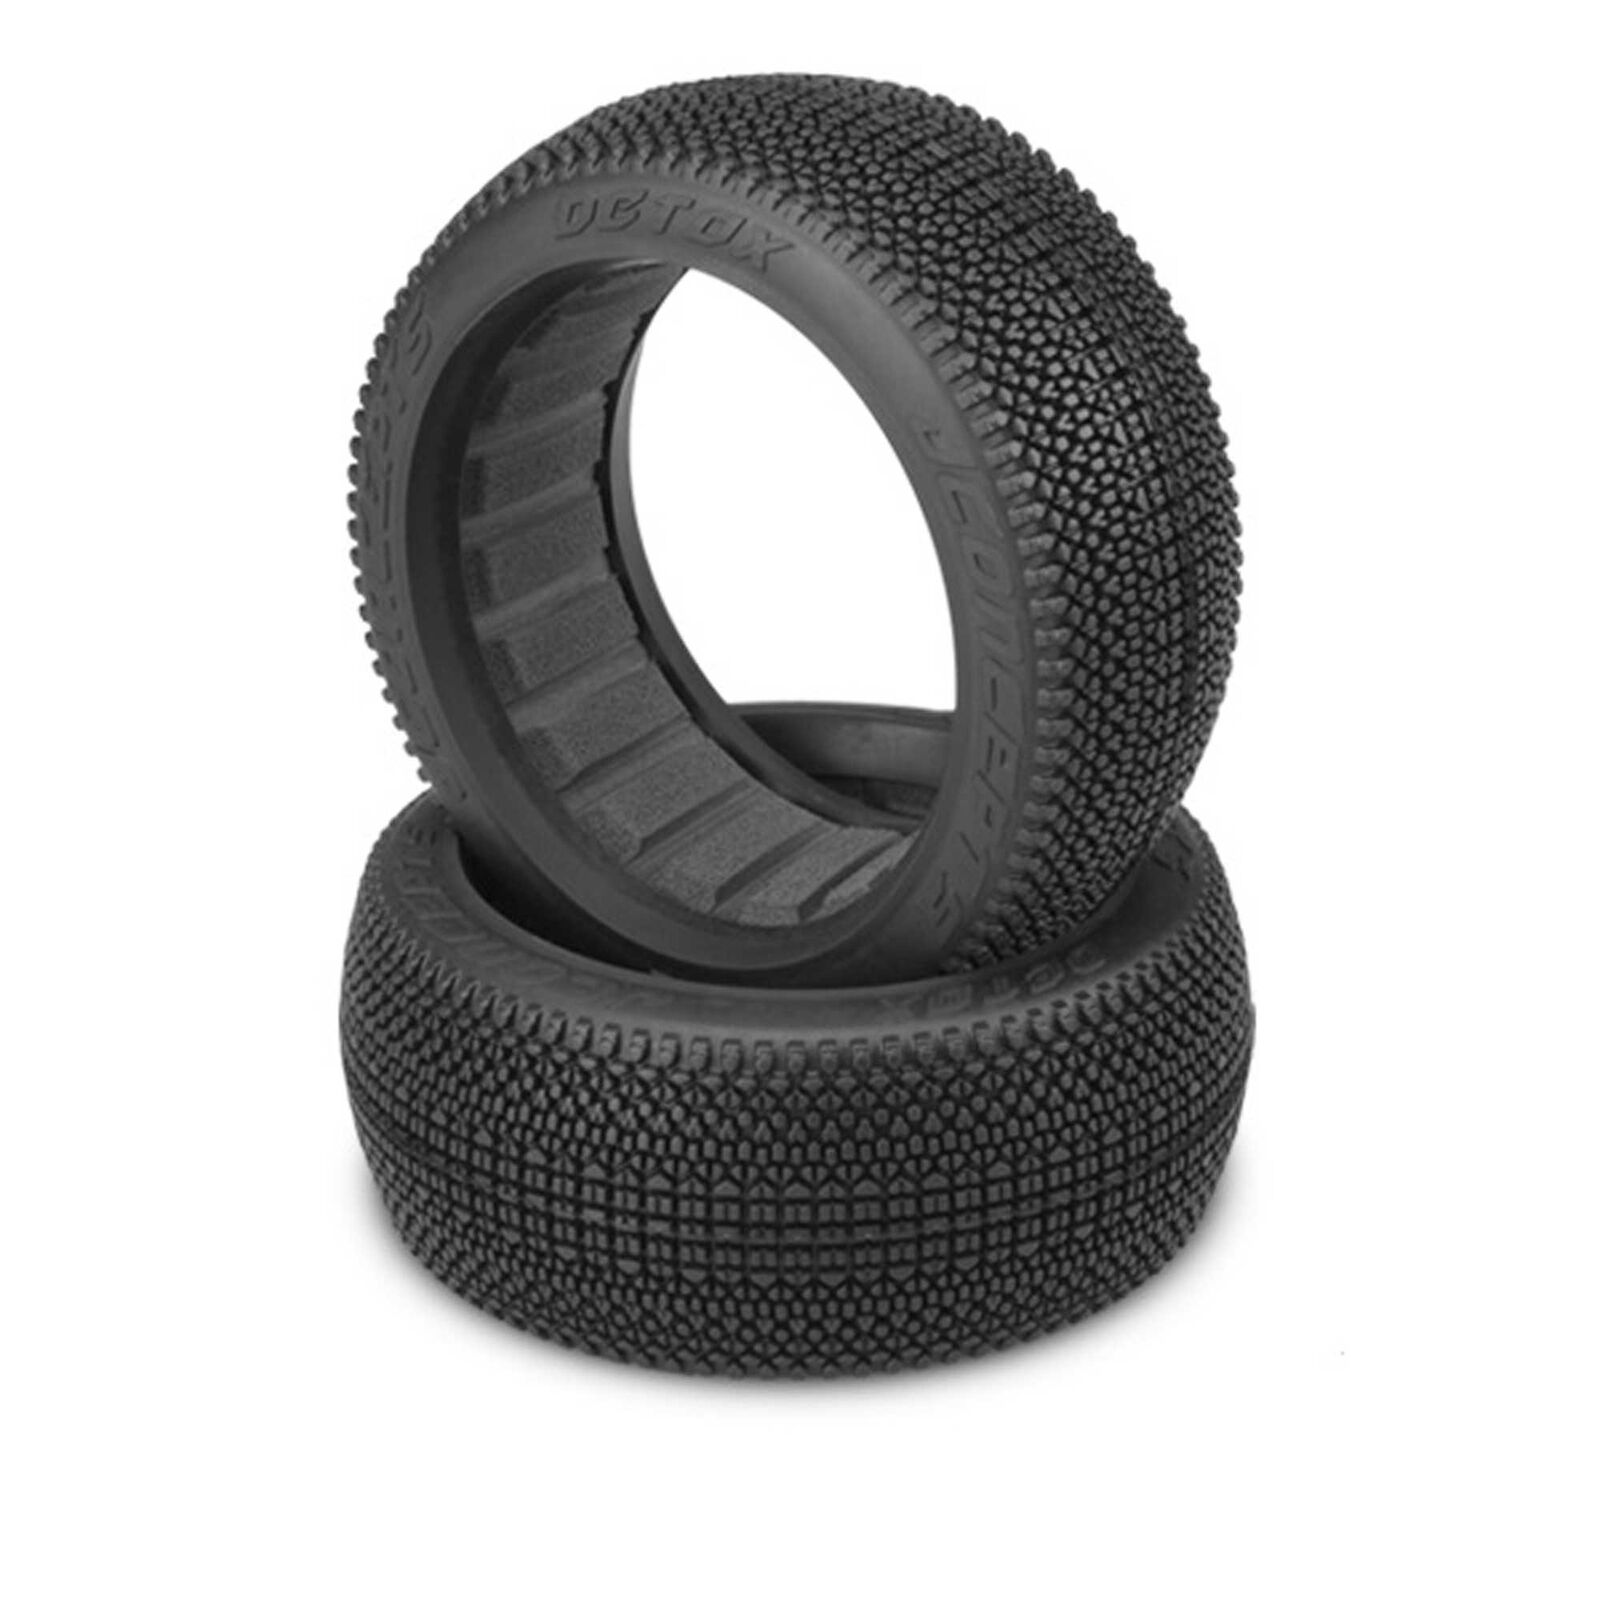 1/8 Detox 83mm Buggy Tires and Inserts, Aqua Compound (2)